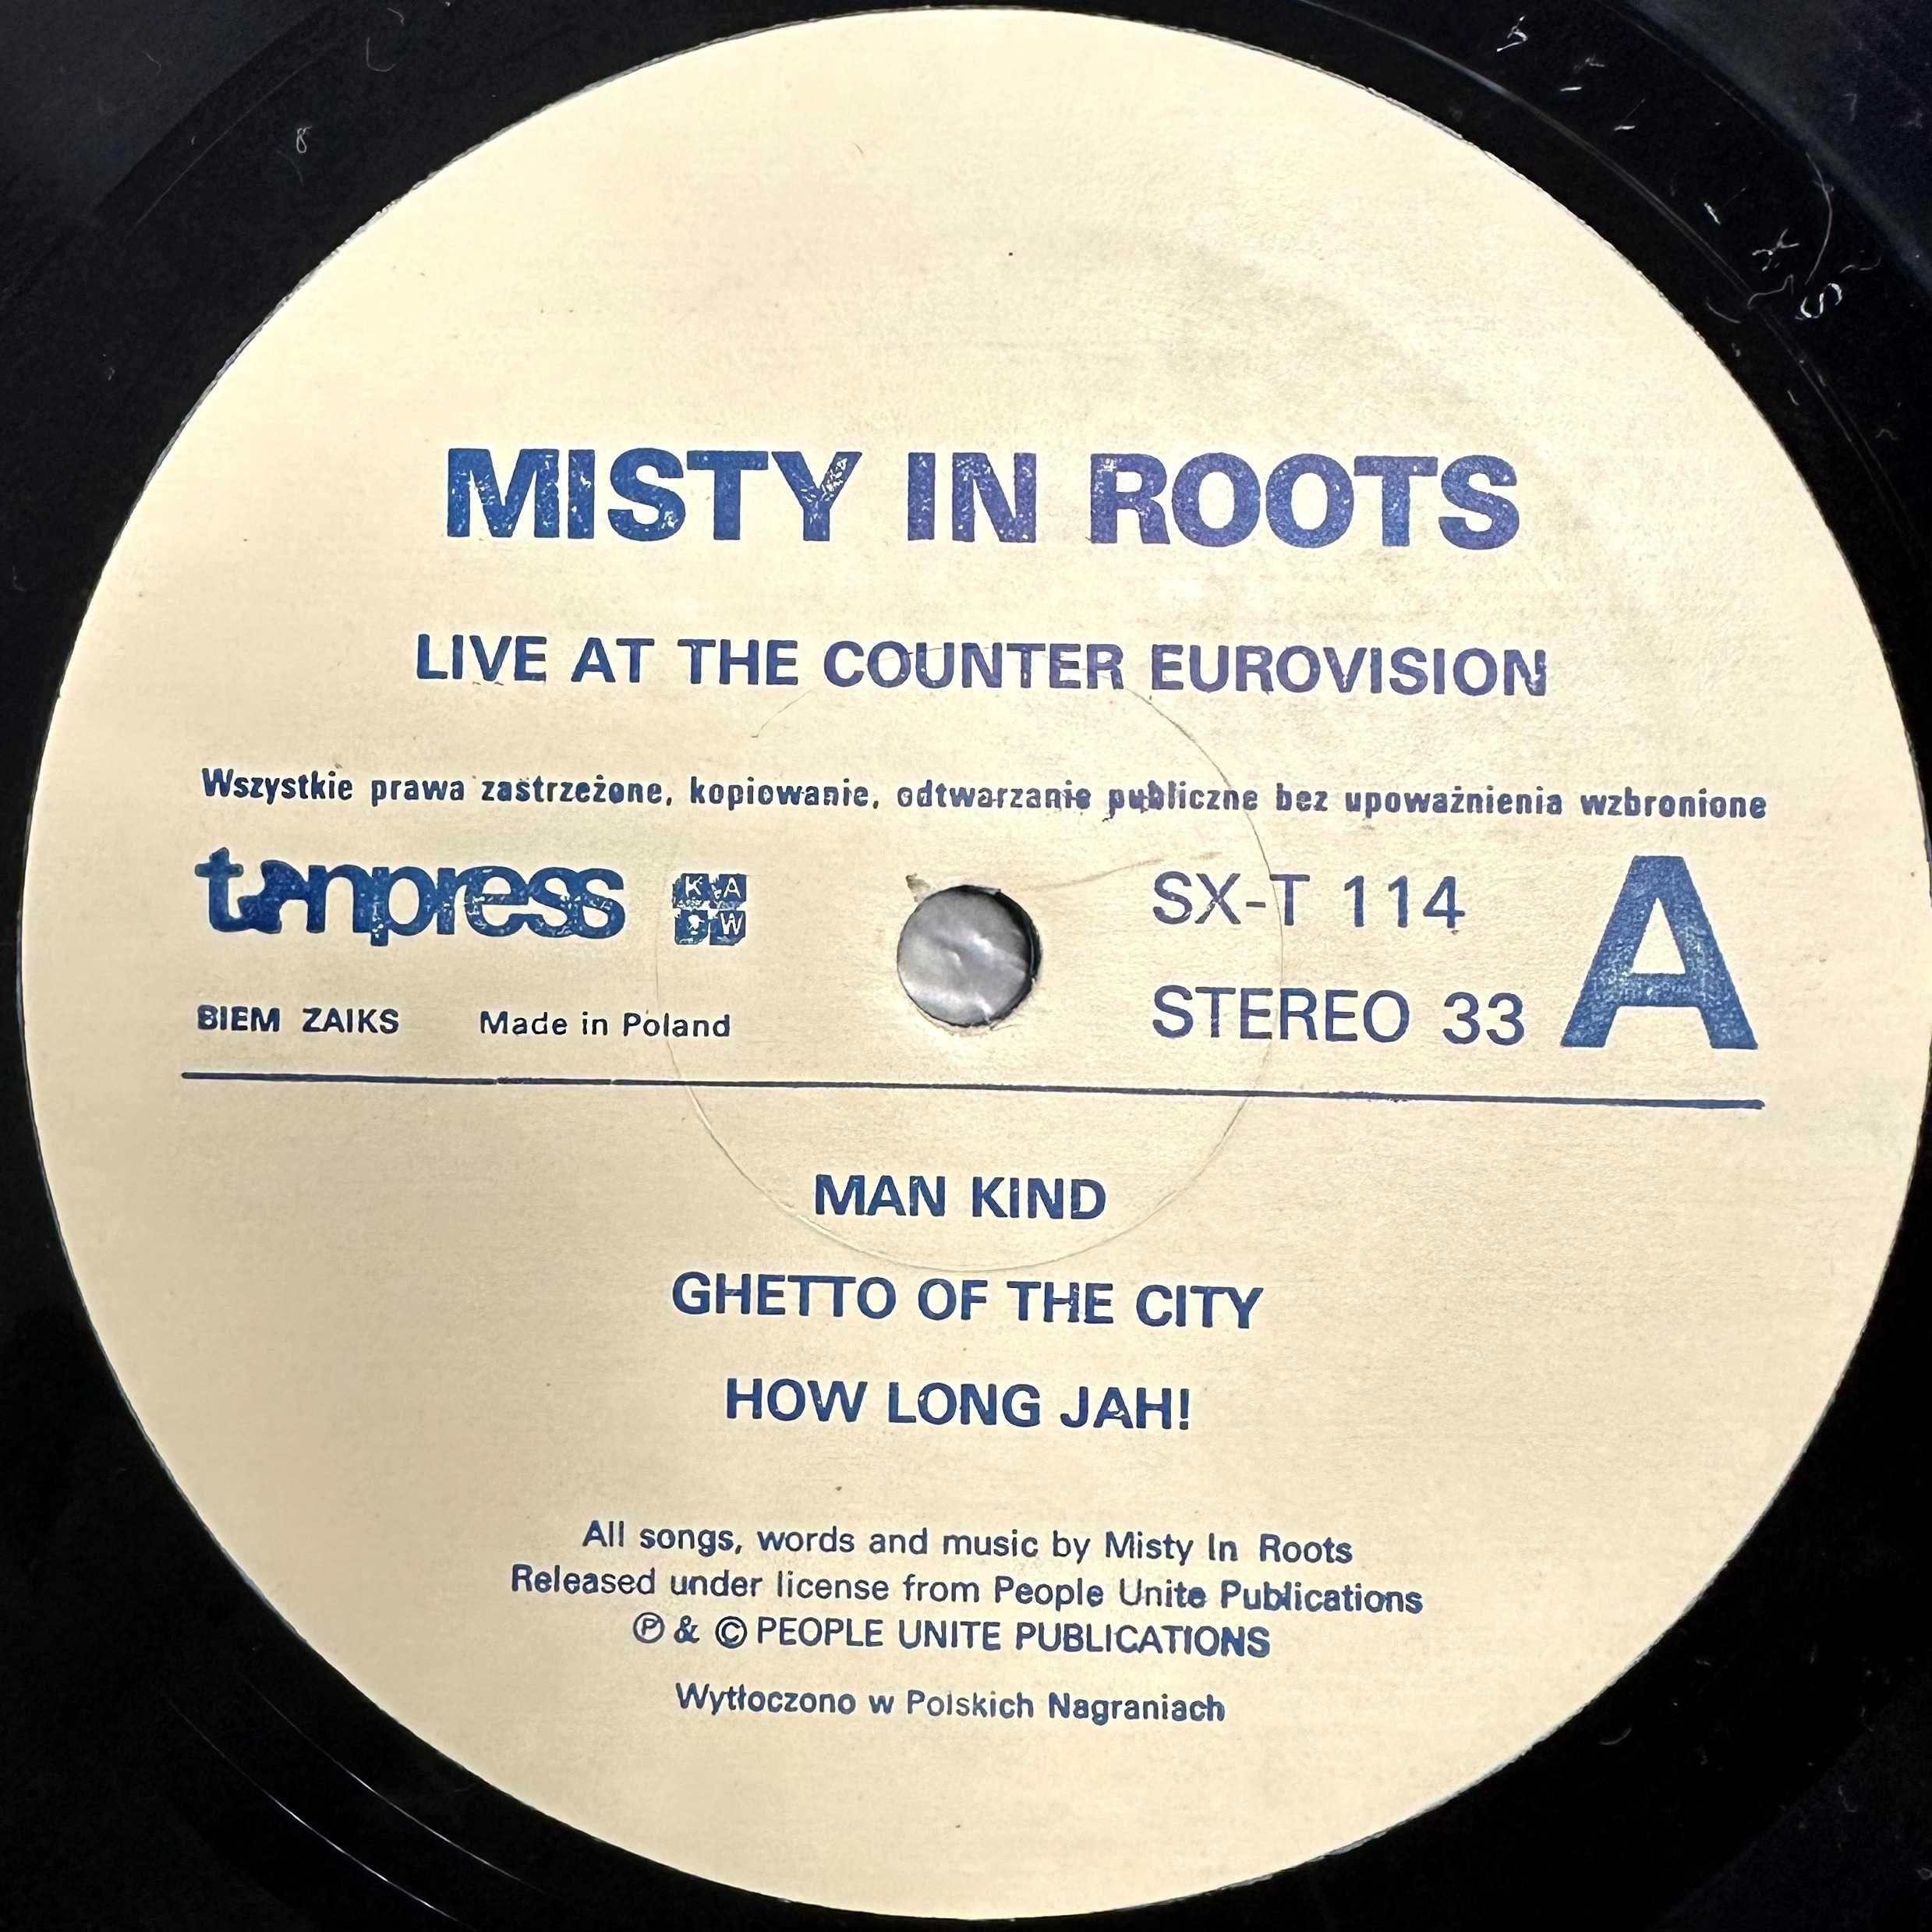 Misty in Roots - Live at the Counter Eurovision (Vinyl, 1979, Poland)